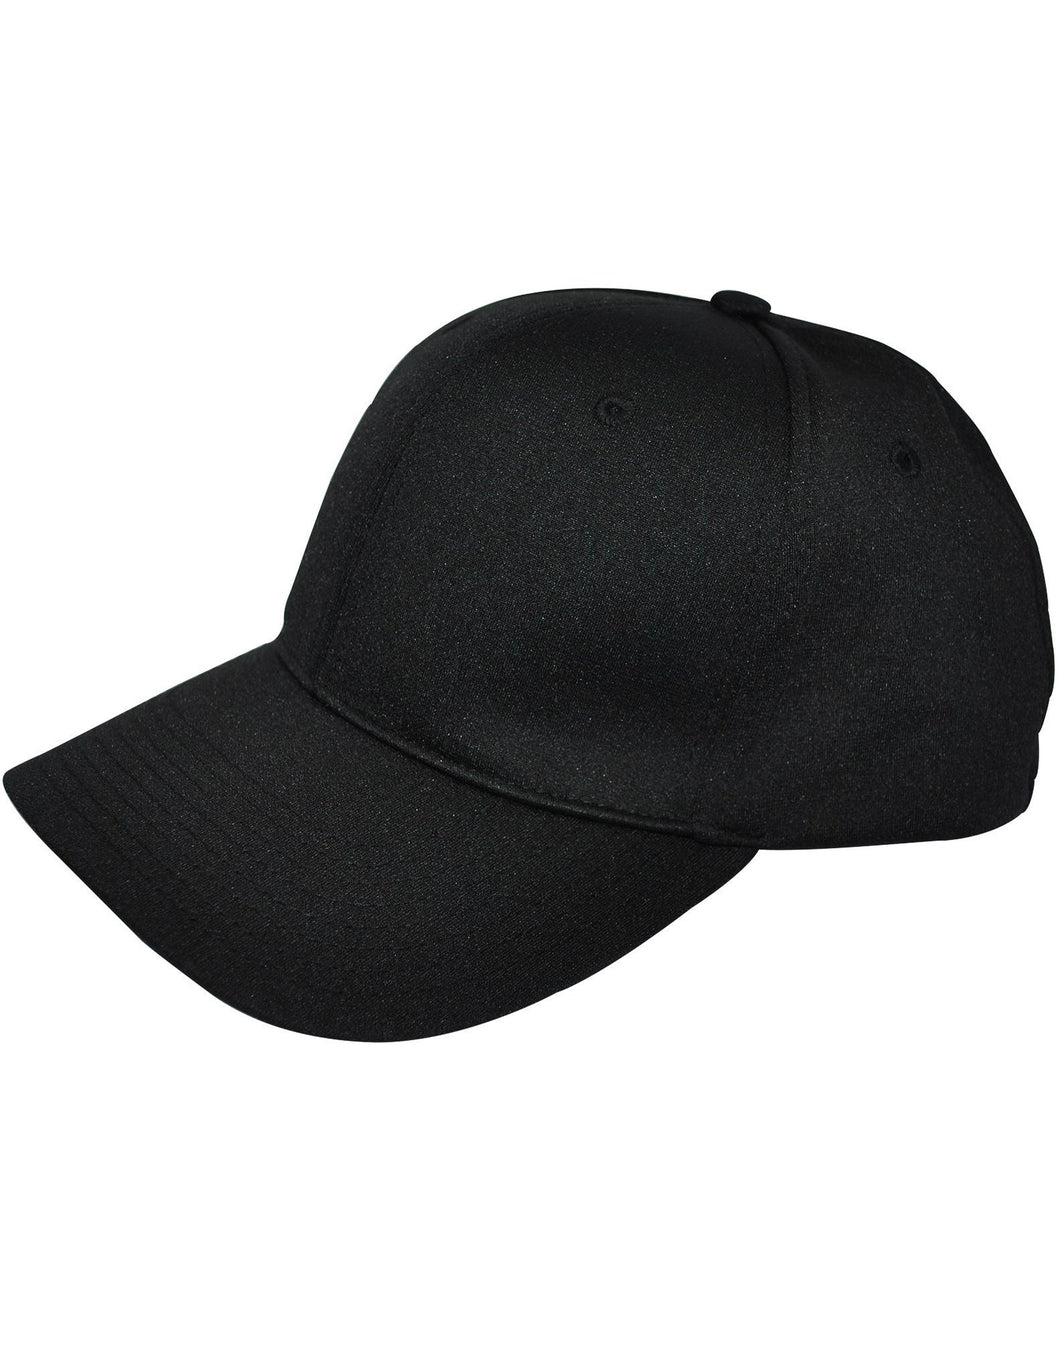 HT308 - Smitty - 8 Stitch Flex Fit Umpire Hat - Available in Black and Navy